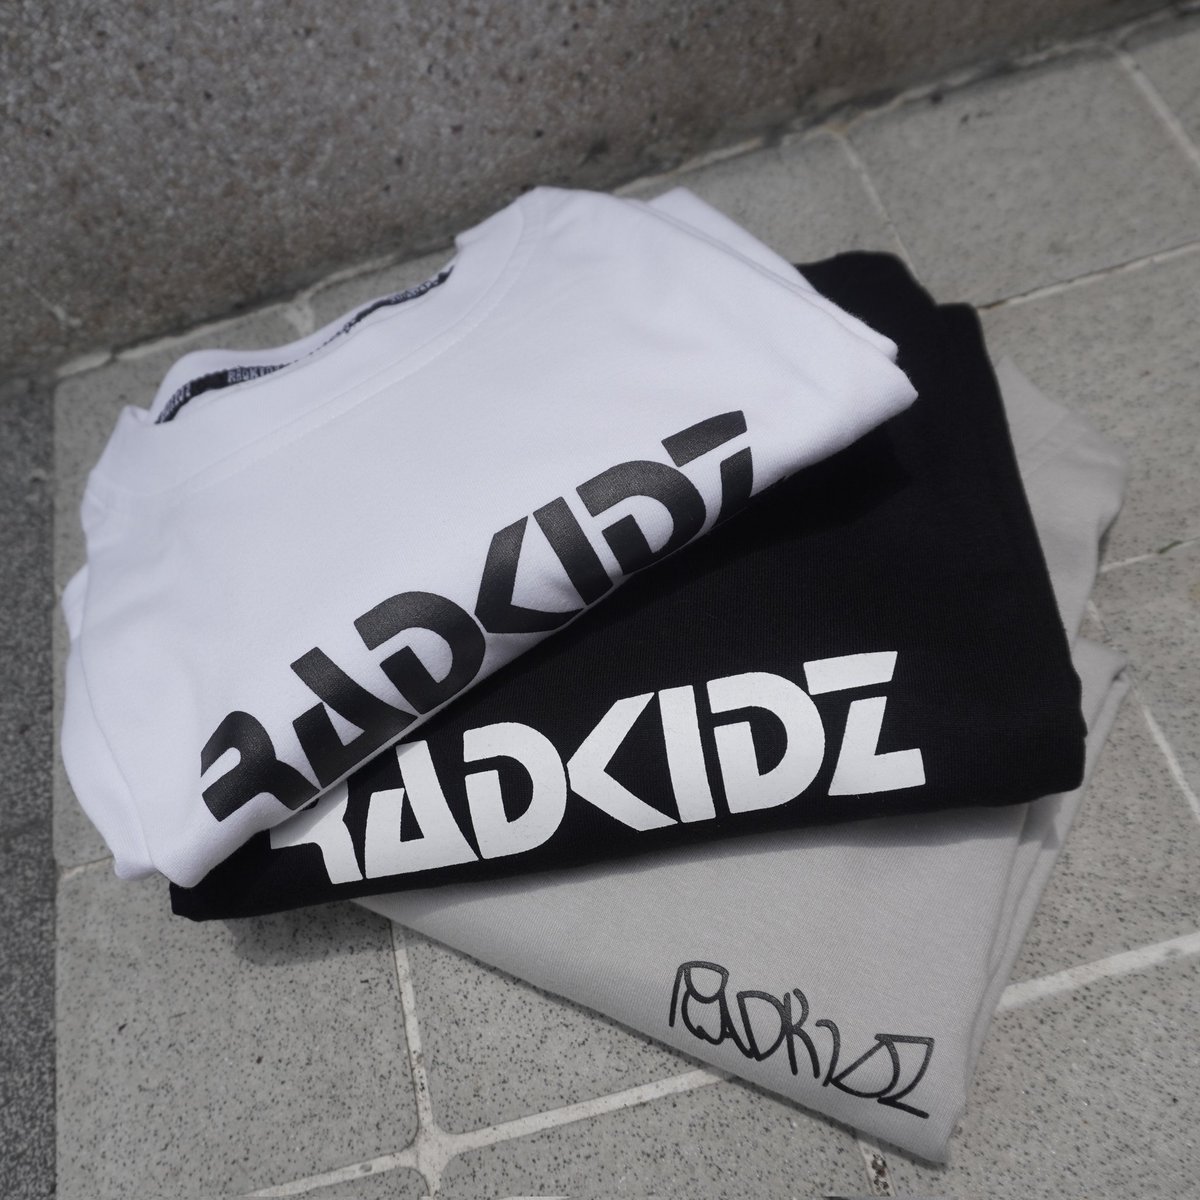 Guess who's back? 😃 Radkidz 'BW' & 'Feeling Gray' are restocked and ready to rock! Grab 'em while they're hot at @PPOPCONVENTION !!! #radkidz #rdkdz #weoddeven #oddonesout